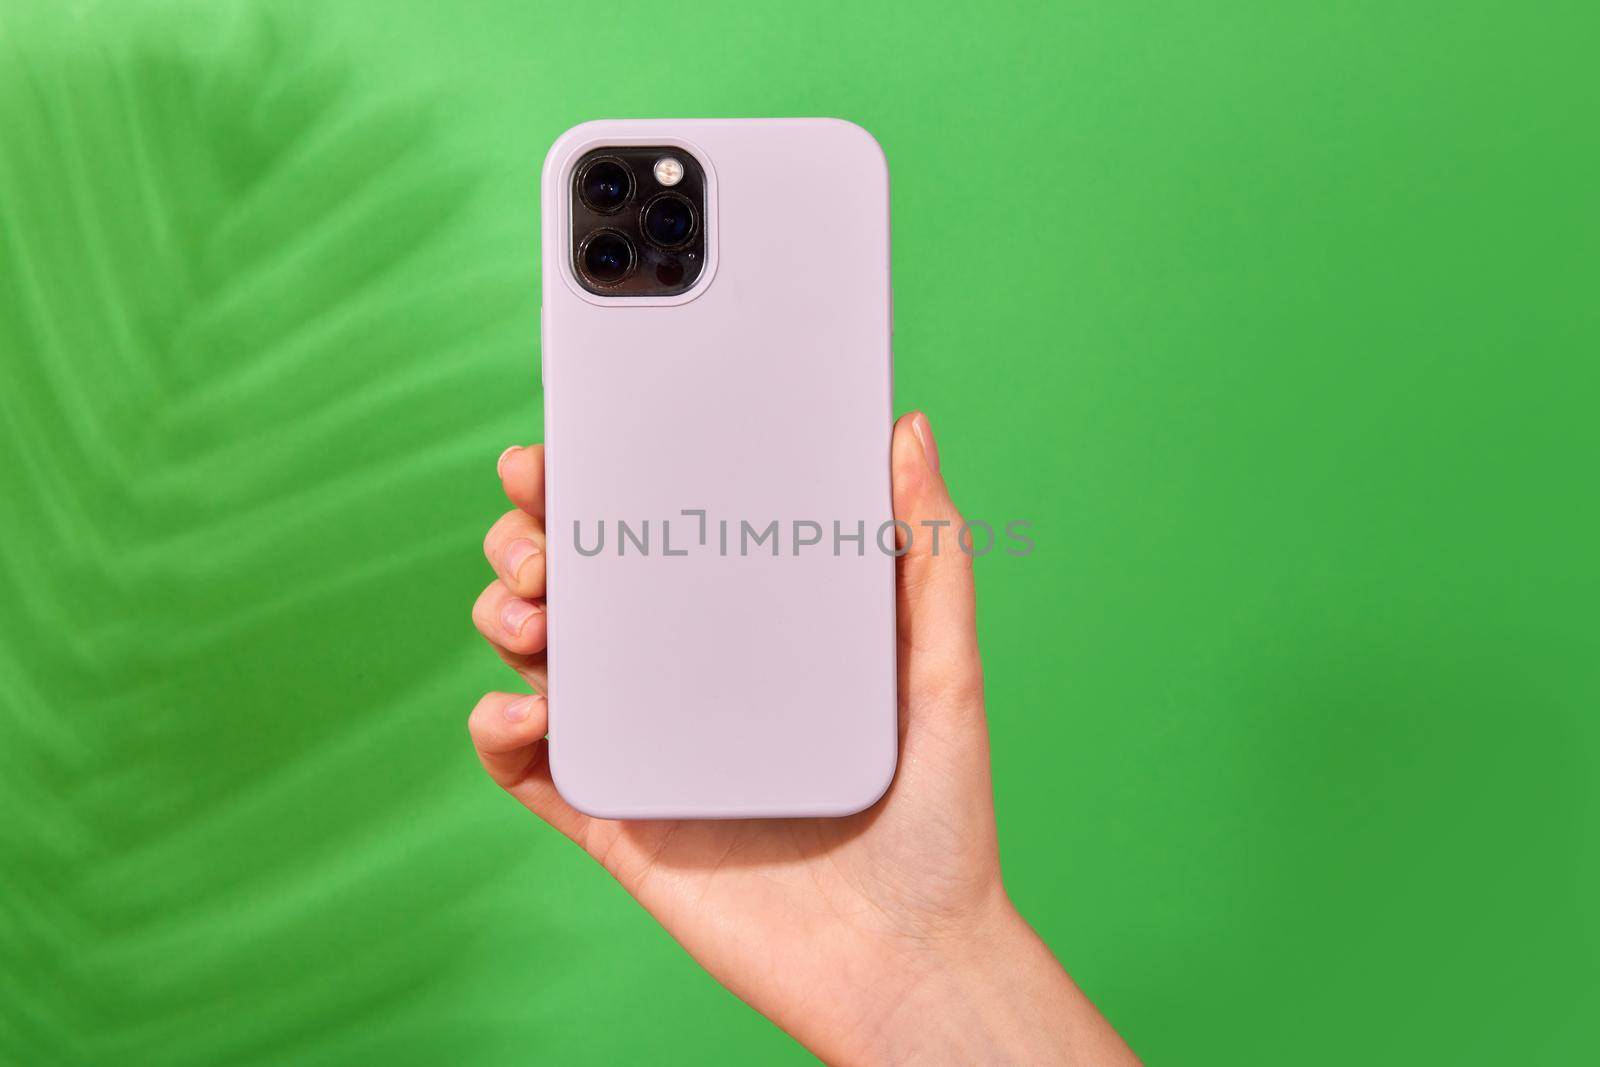 Hands holding a smartphone in a case by Demkat